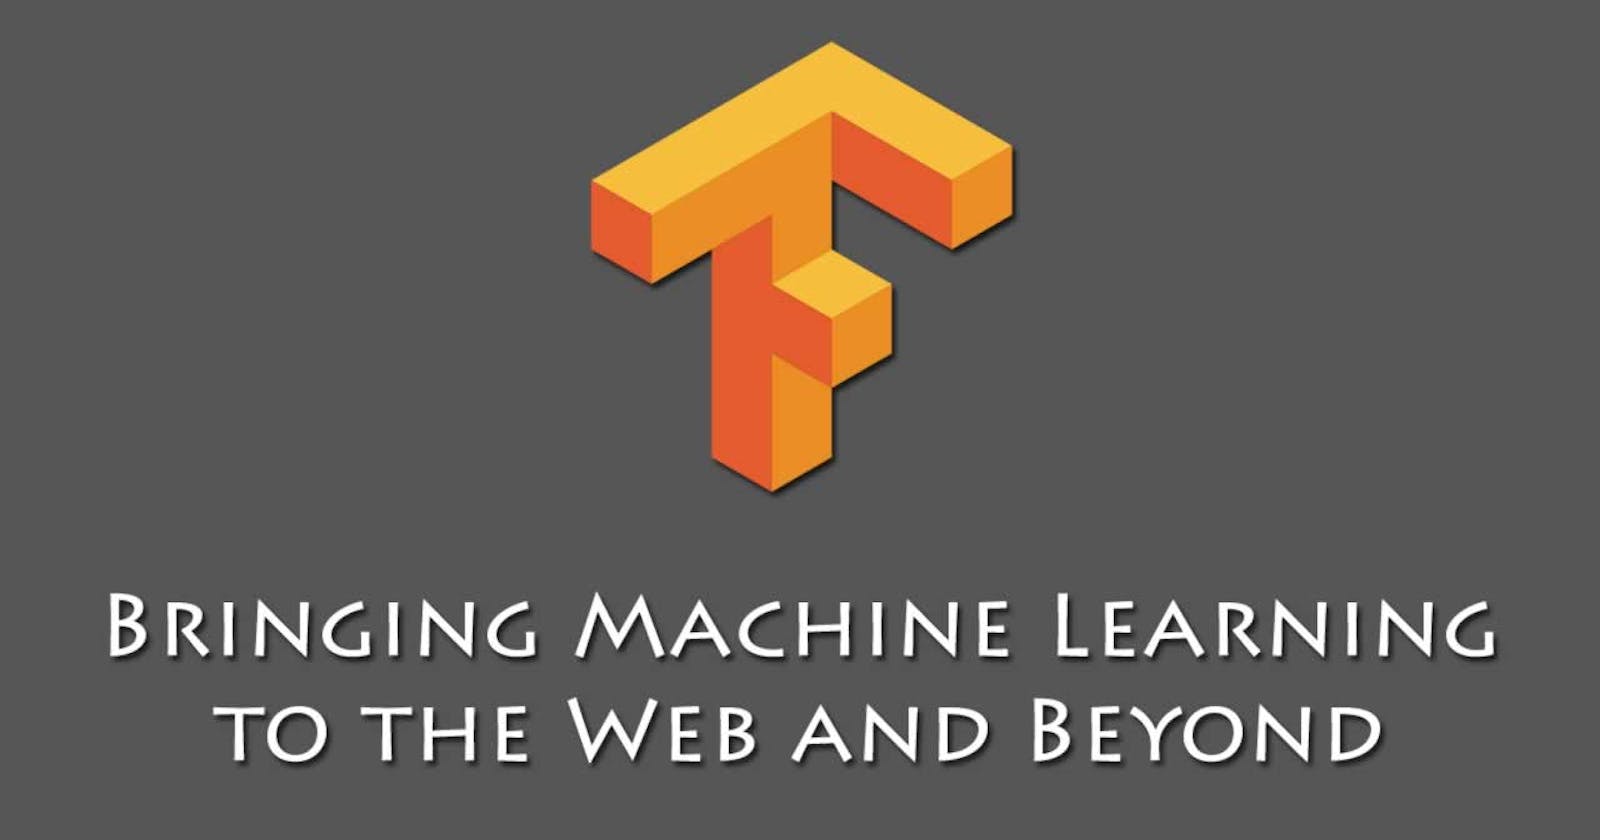 TensorFlow.js Bringing Machine Learning to the Web and Beyond